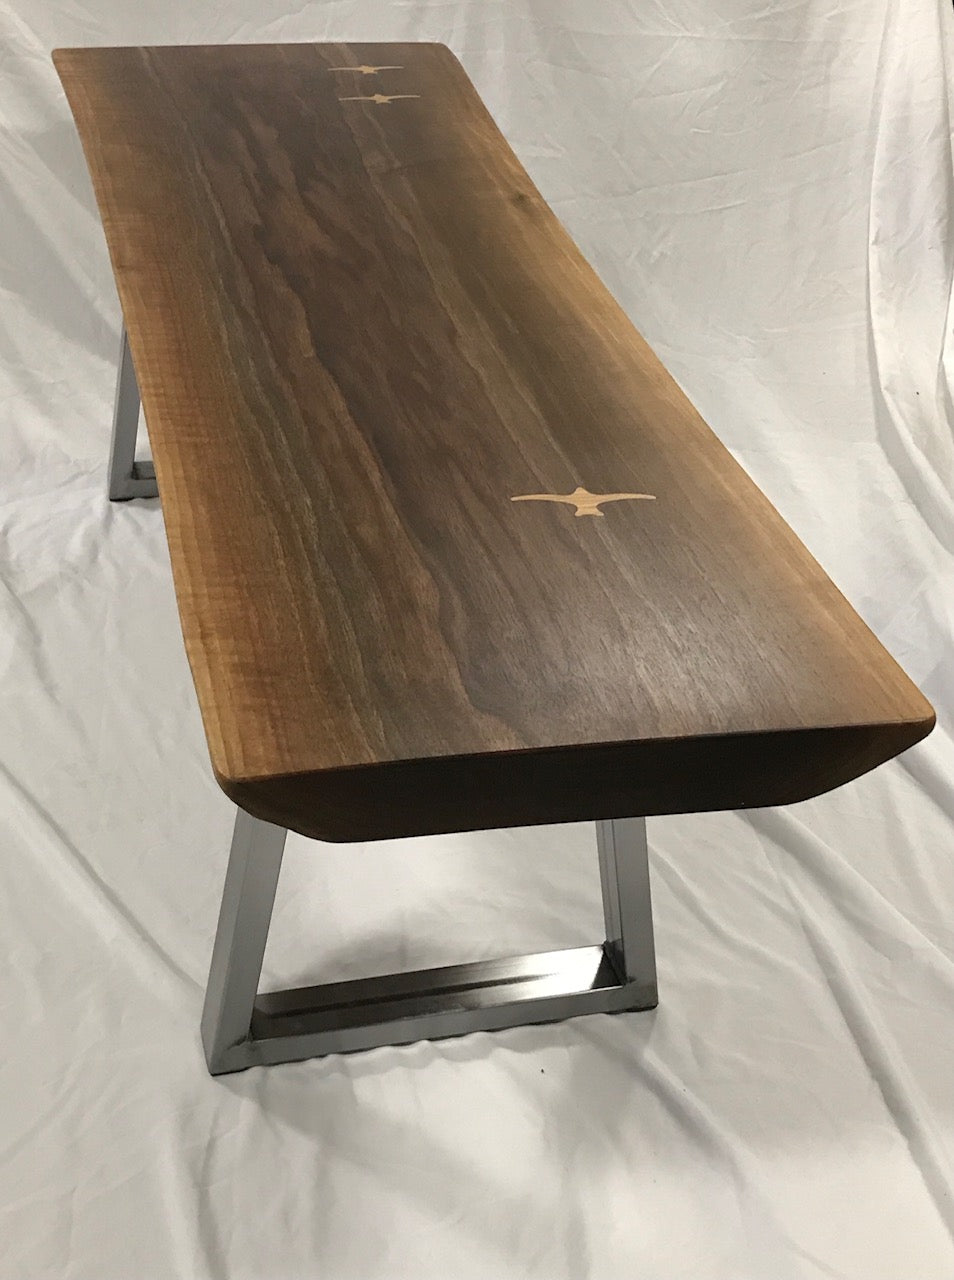 live edge walnut coffee table with white oak seabird inlay - end angle view